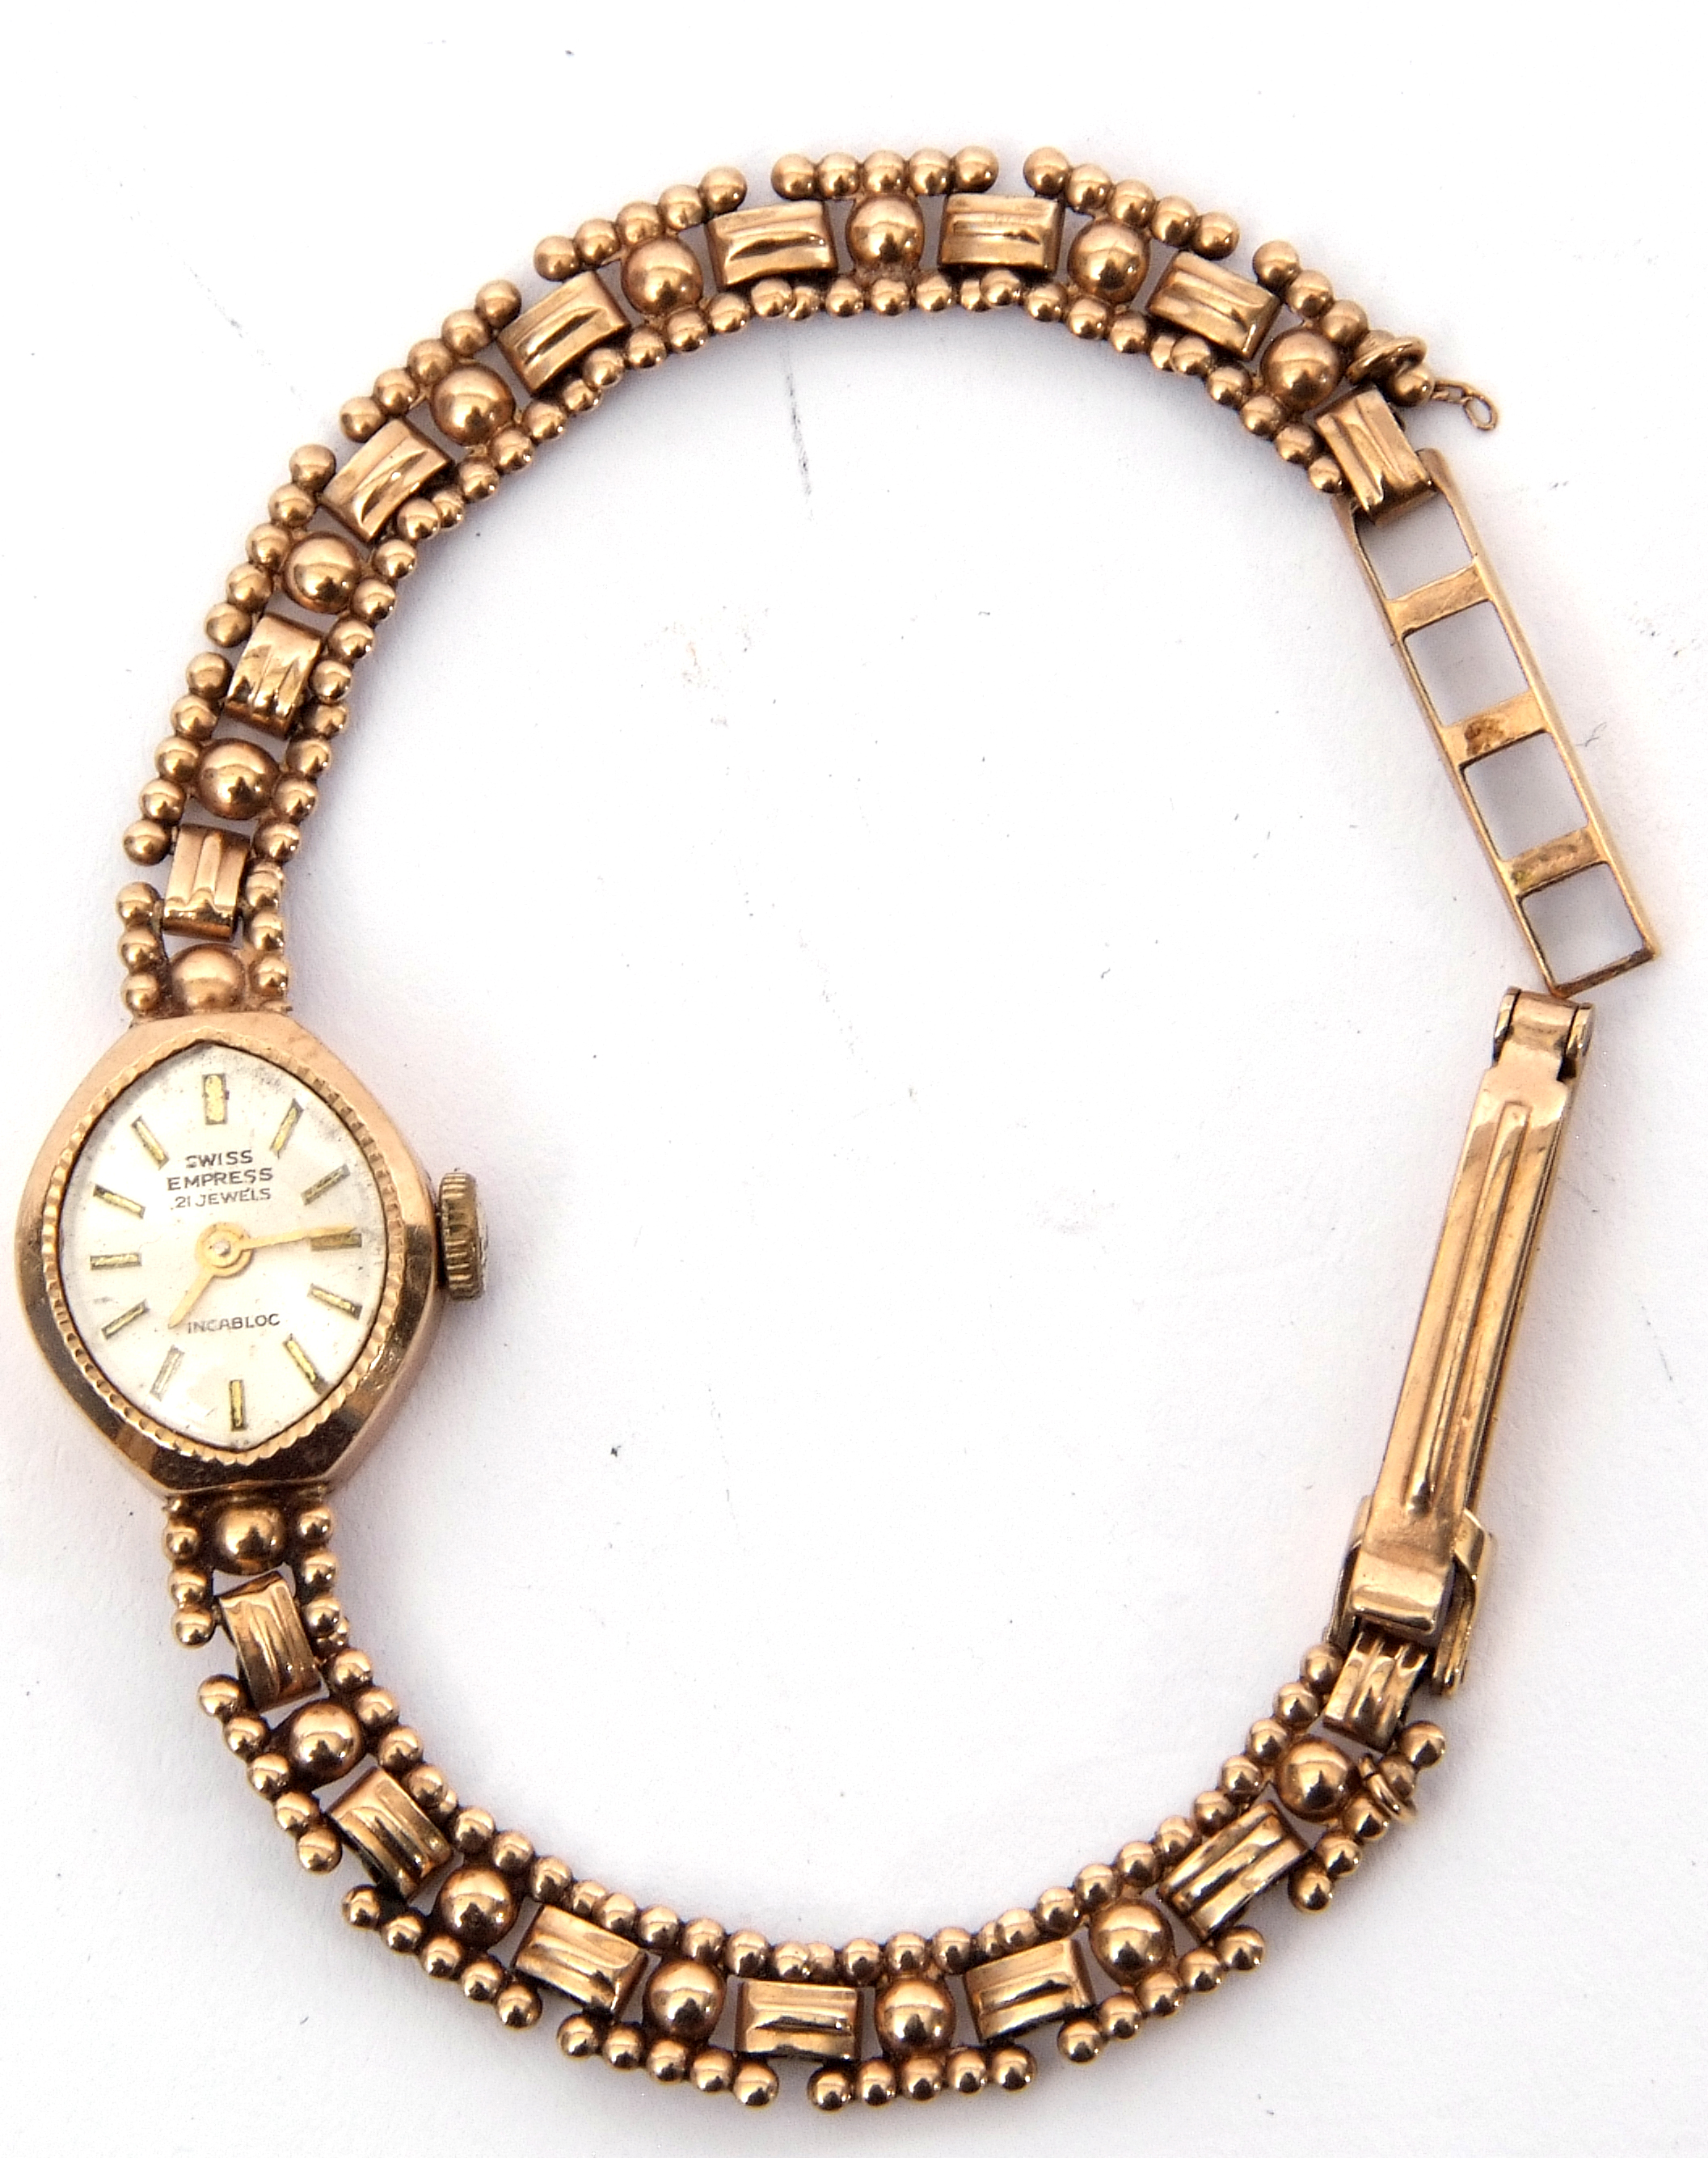 Ladies 9ct gold cased "Swiss Empress" cocktail watch, mounted on a hallmarked 9ct gold fancy link